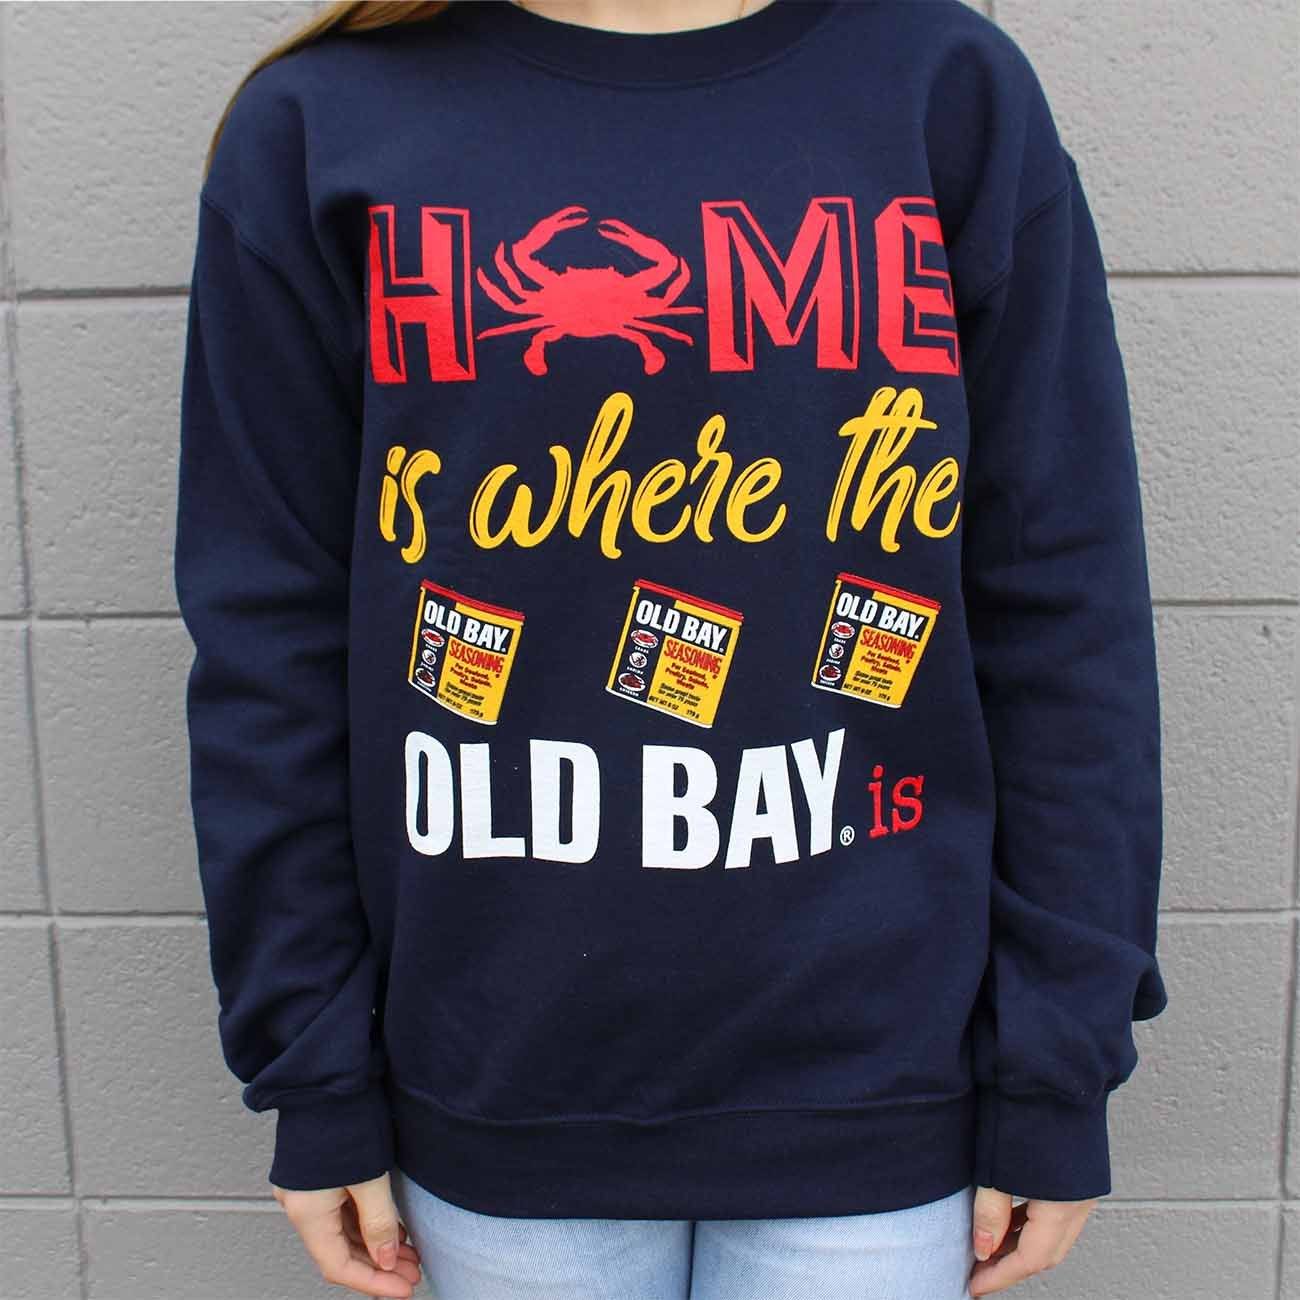 Home Is Where The Old Bay Is (Navy) / Crew Sweatshirt - Route One Apparel